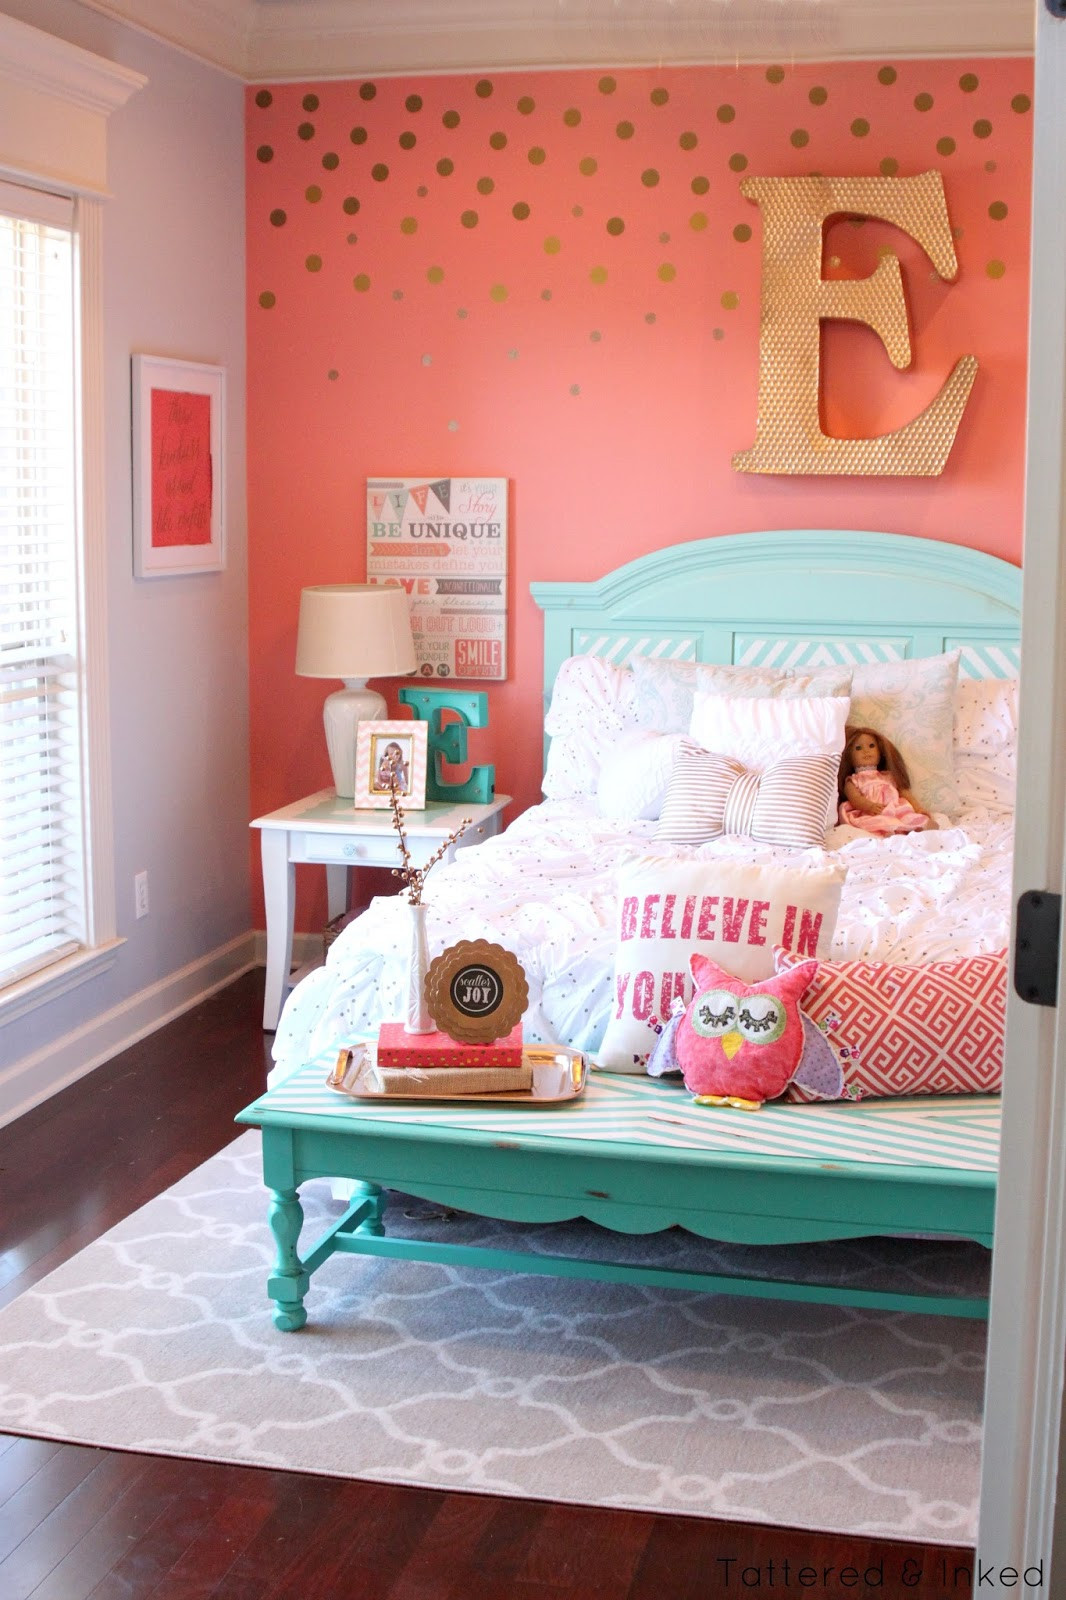 Girl Bedroom Painting Ideas
 Tattered and Inked Coral & Aqua Girl s Room Makeover